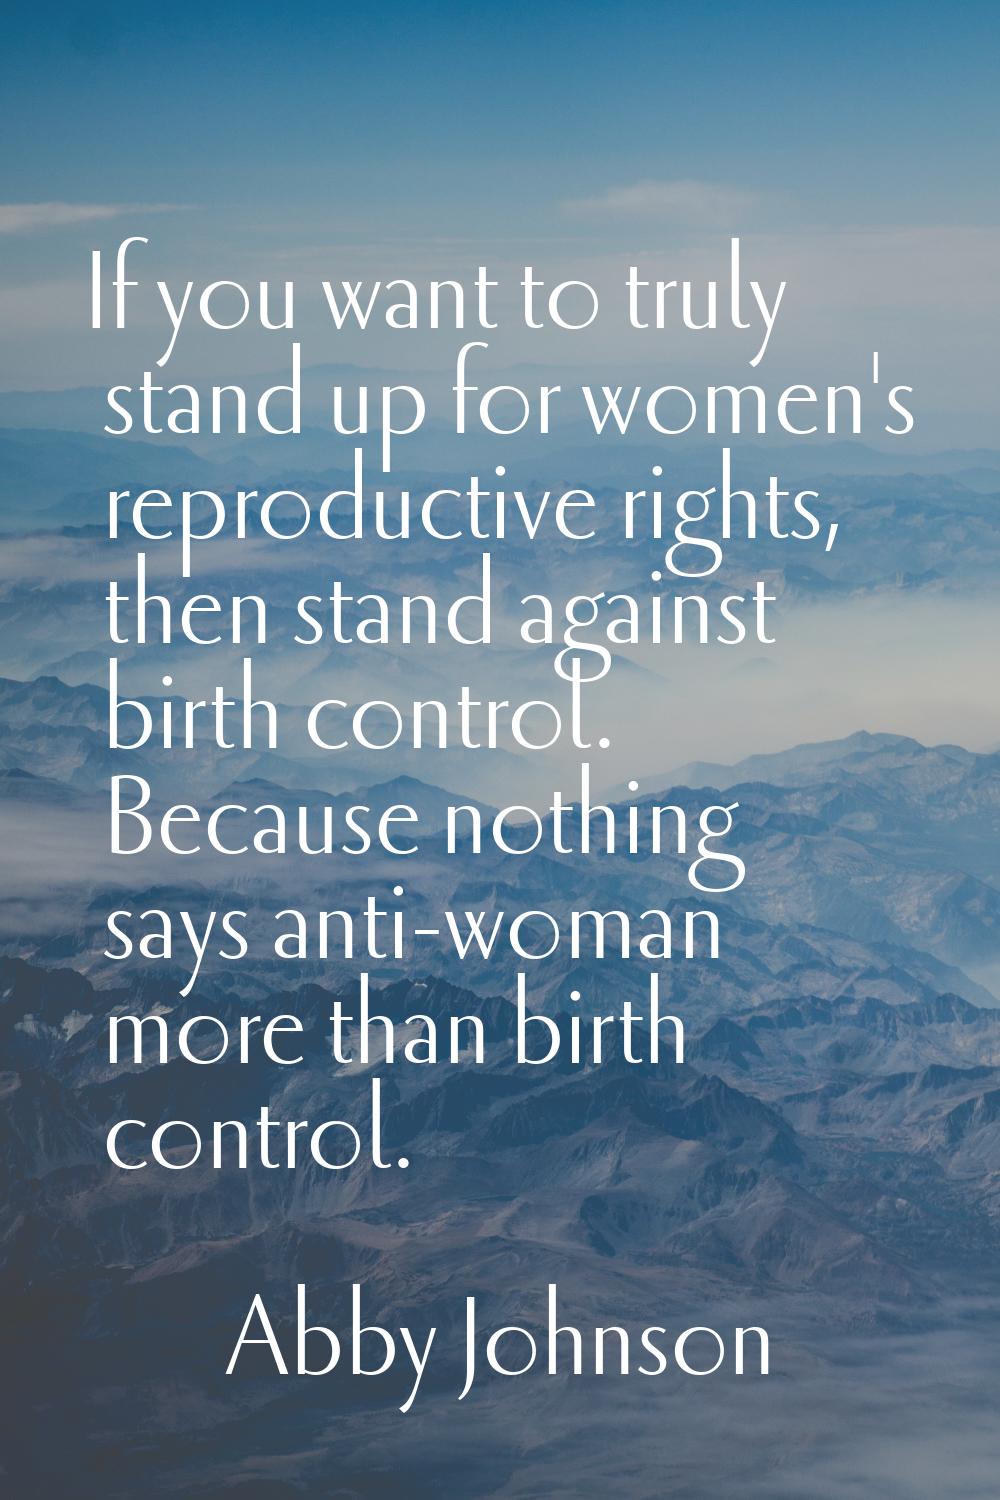 If you want to truly stand up for women's reproductive rights, then stand against birth control. Be